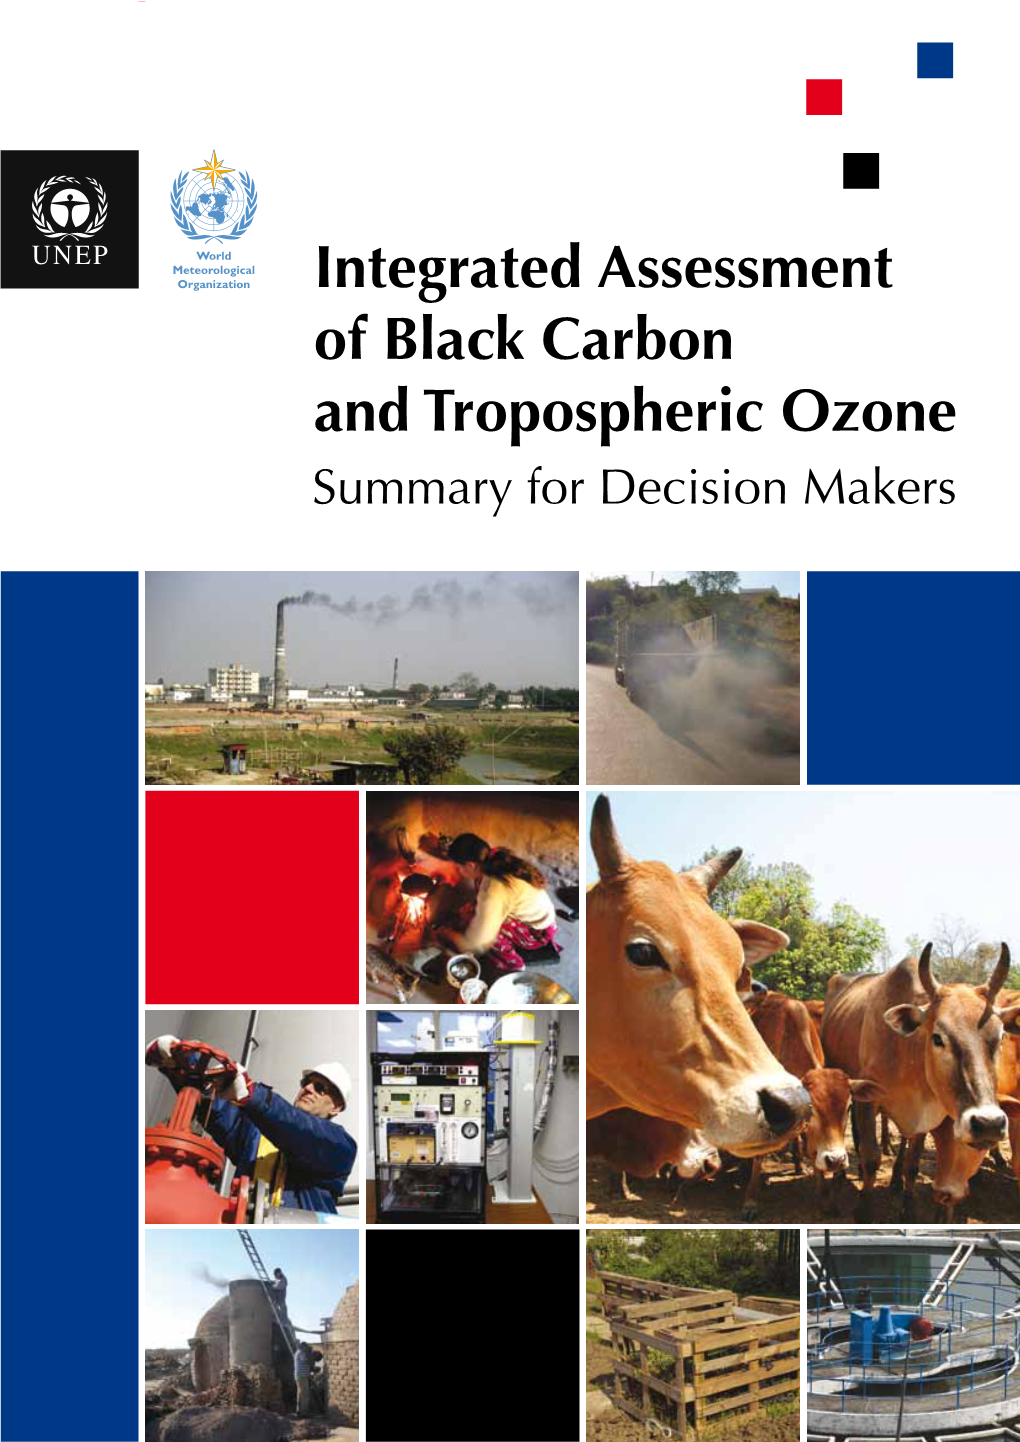 Integrated Assessment of Black Carbon and Tropospheric Ozone Summary for Decision Makers